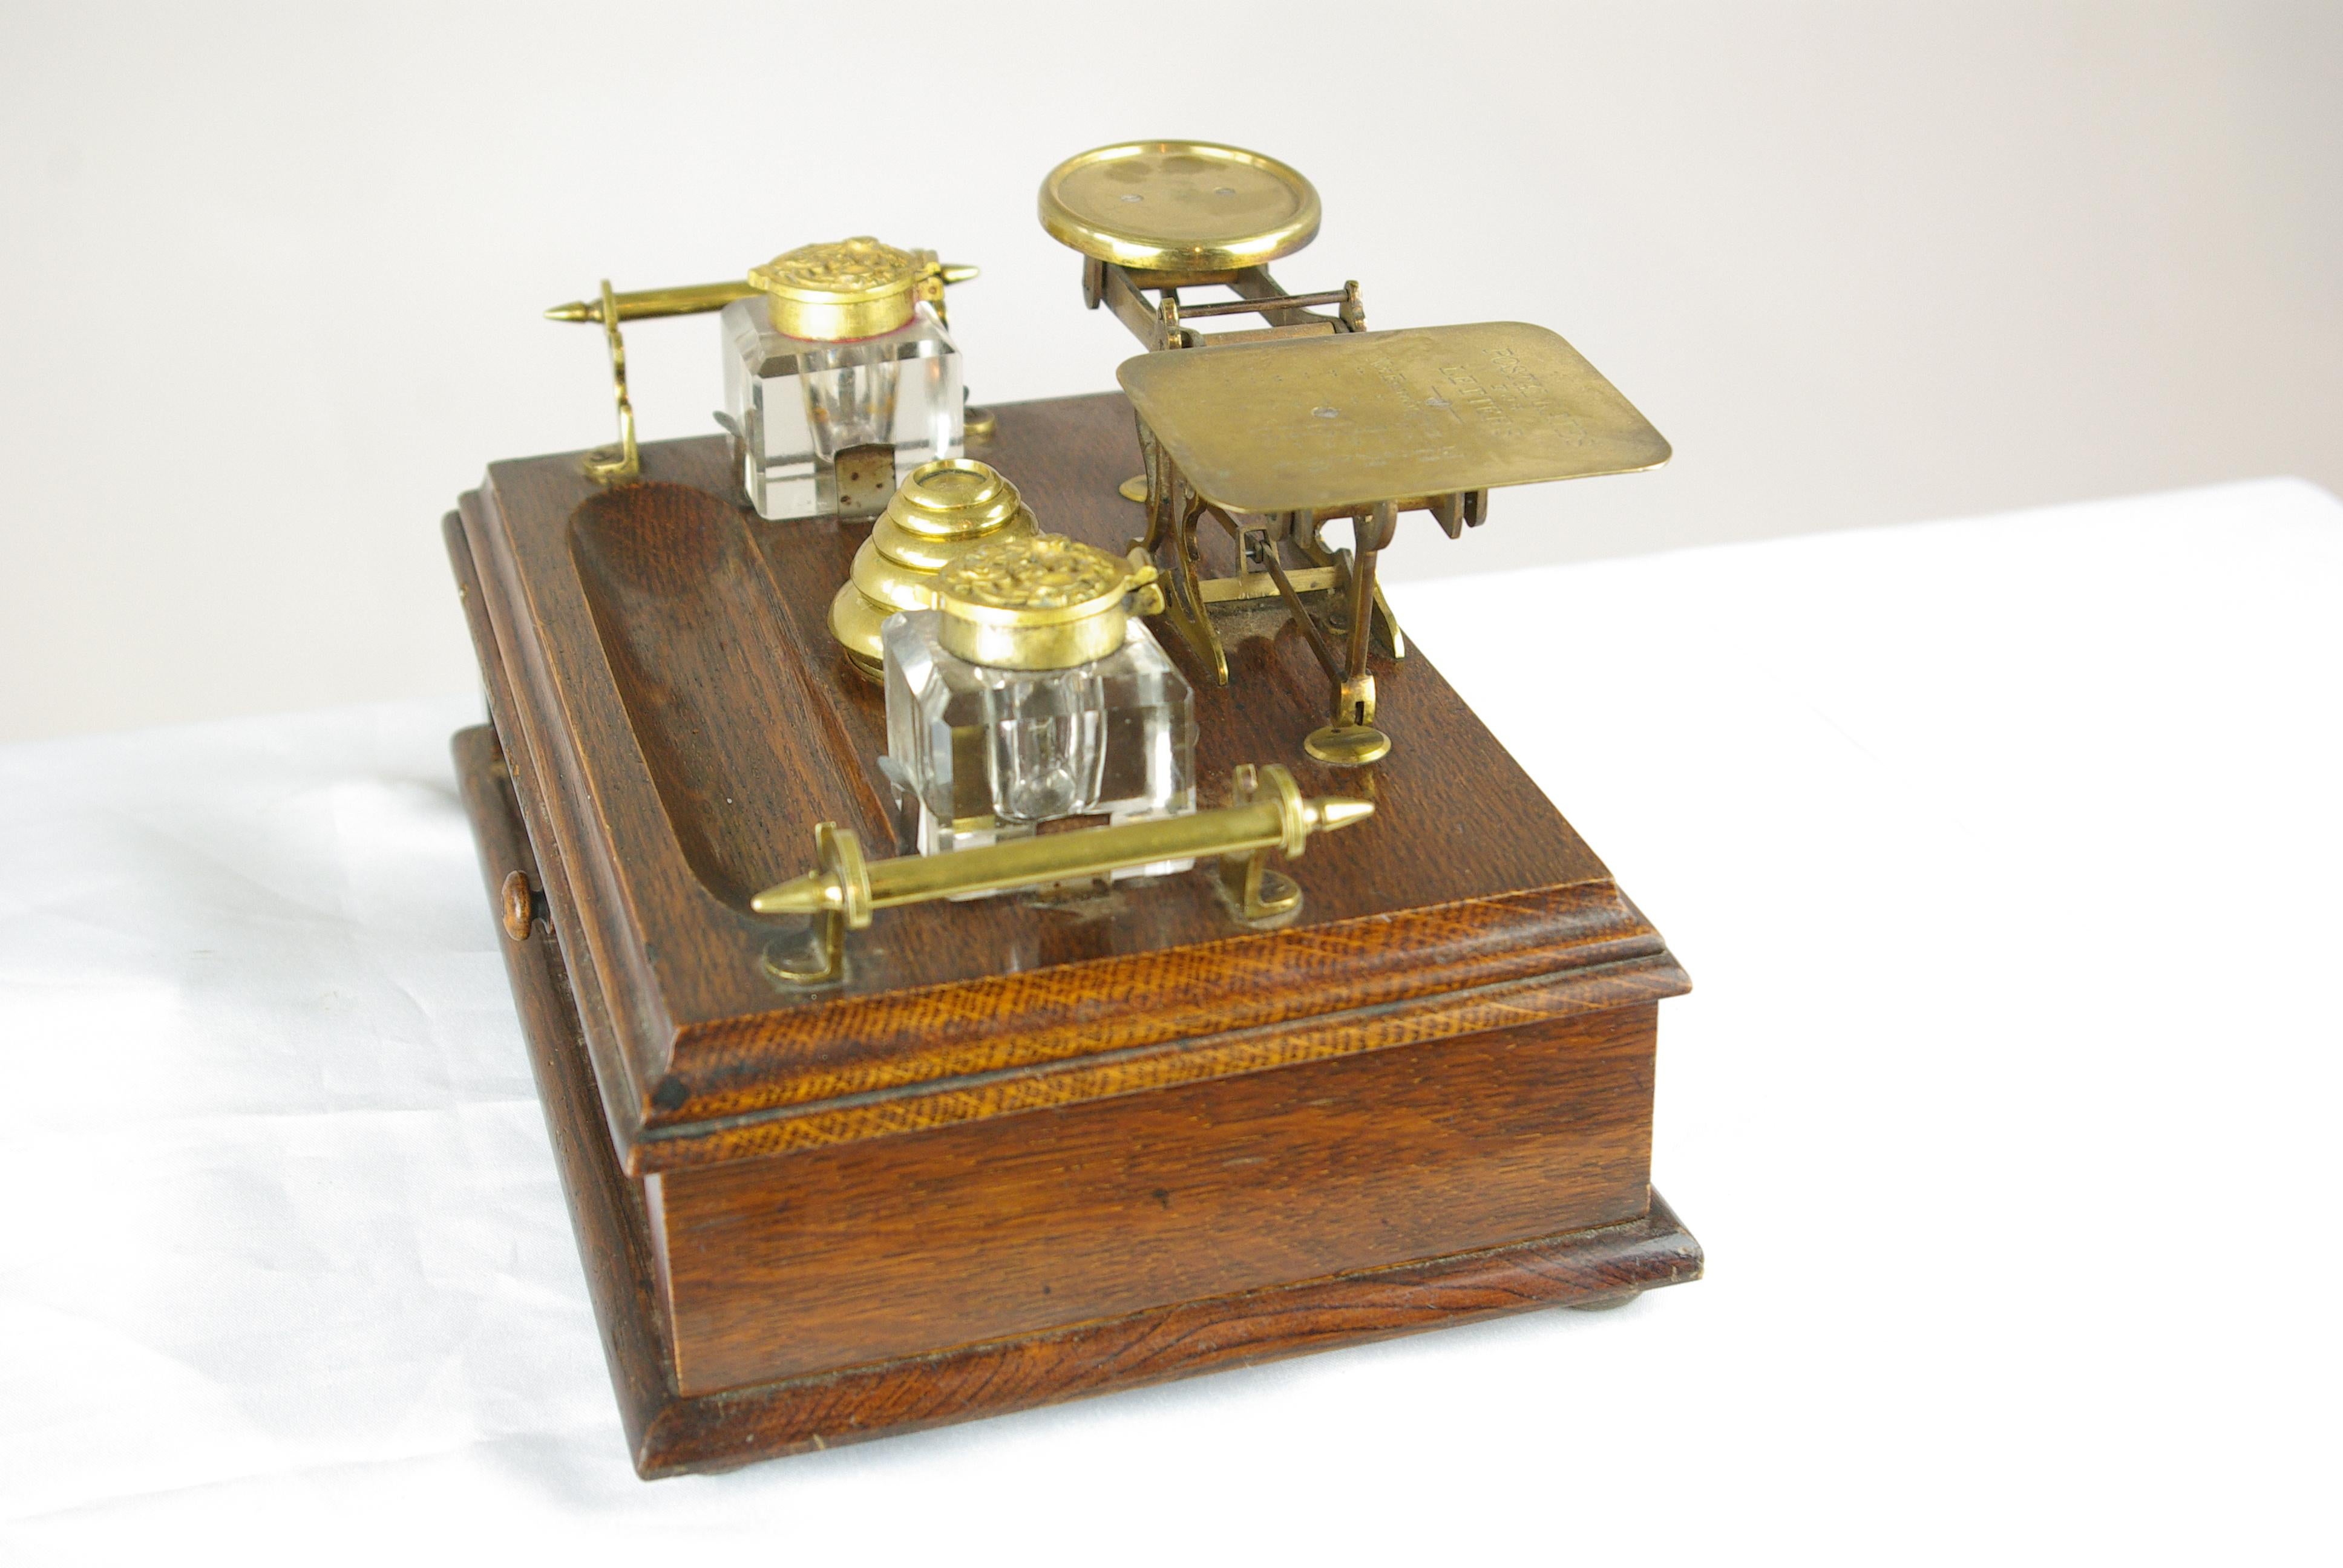 Hand-Crafted Antique Desk Set, Scottish Victorian Inkstand, Postal Scale, and Weights, B1430C